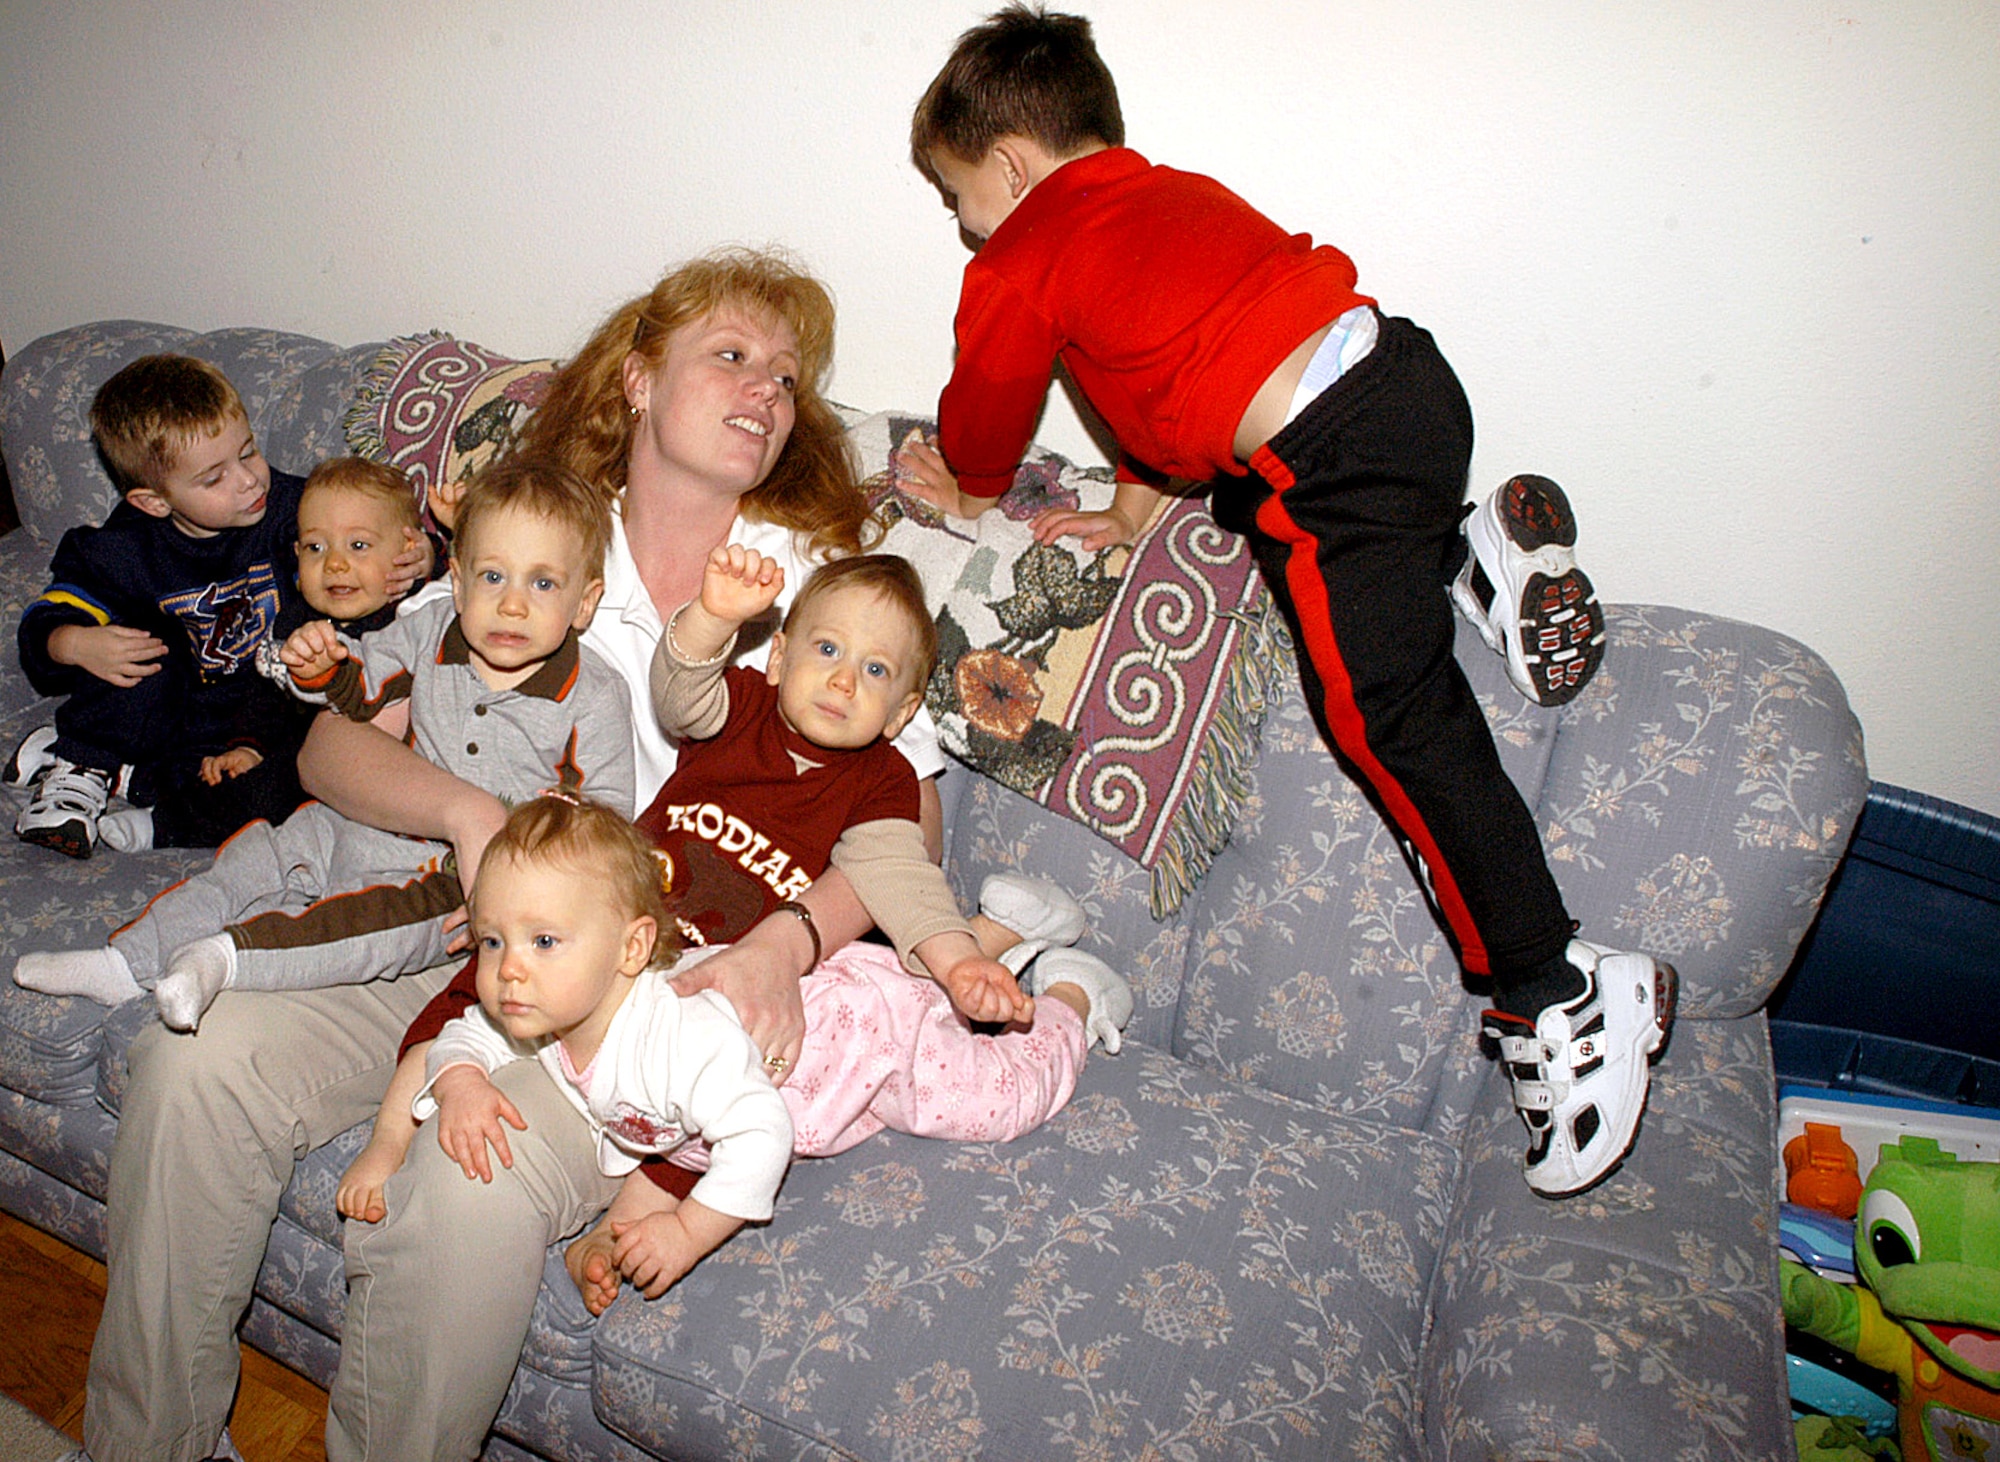 EDWARDS AIR FORCE BASE, Calif. -- Jackie Kearl tries to get her children together for a group photo here.  They are (from left) 3-year-old Hunter, 1-year-olds Bryan, Jayson, Cassie and Nathan, and 3-year-old Tanner Kearl.  Mrs. Kearl is married to Capt. Jay Kearl of the U.S. Air Force Test Pilot School.  (U.S. Air Force photo by Senior Airman Jet Fabara)